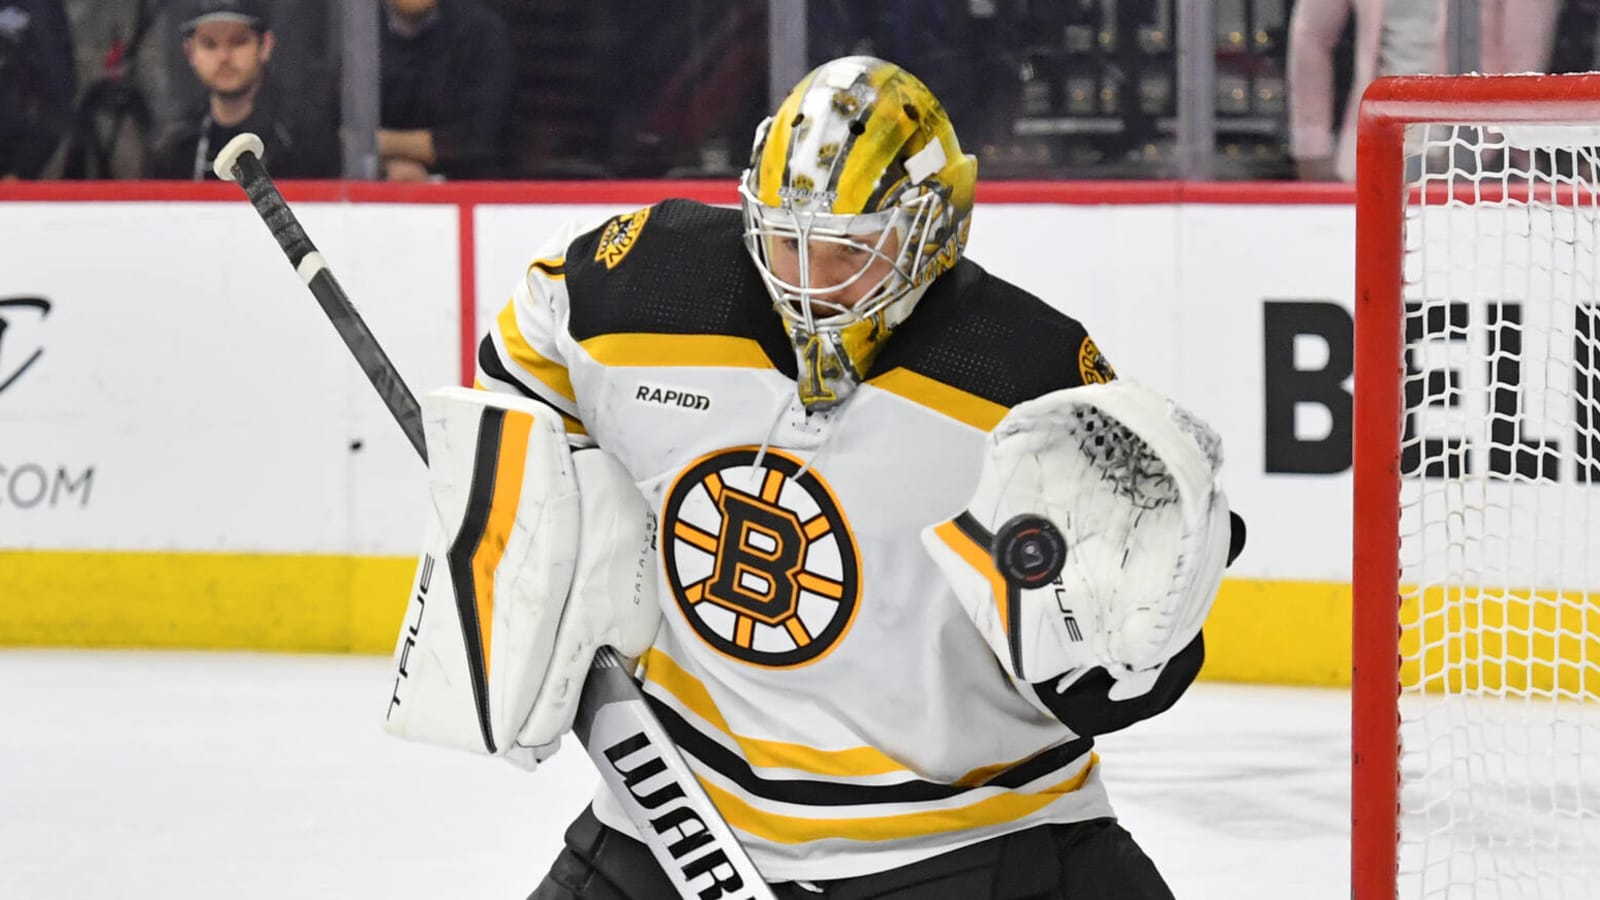 Red's gone. Red's gone': Bruins goalie Jeremy Swayman finds purpose in  tragedy - The Athletic